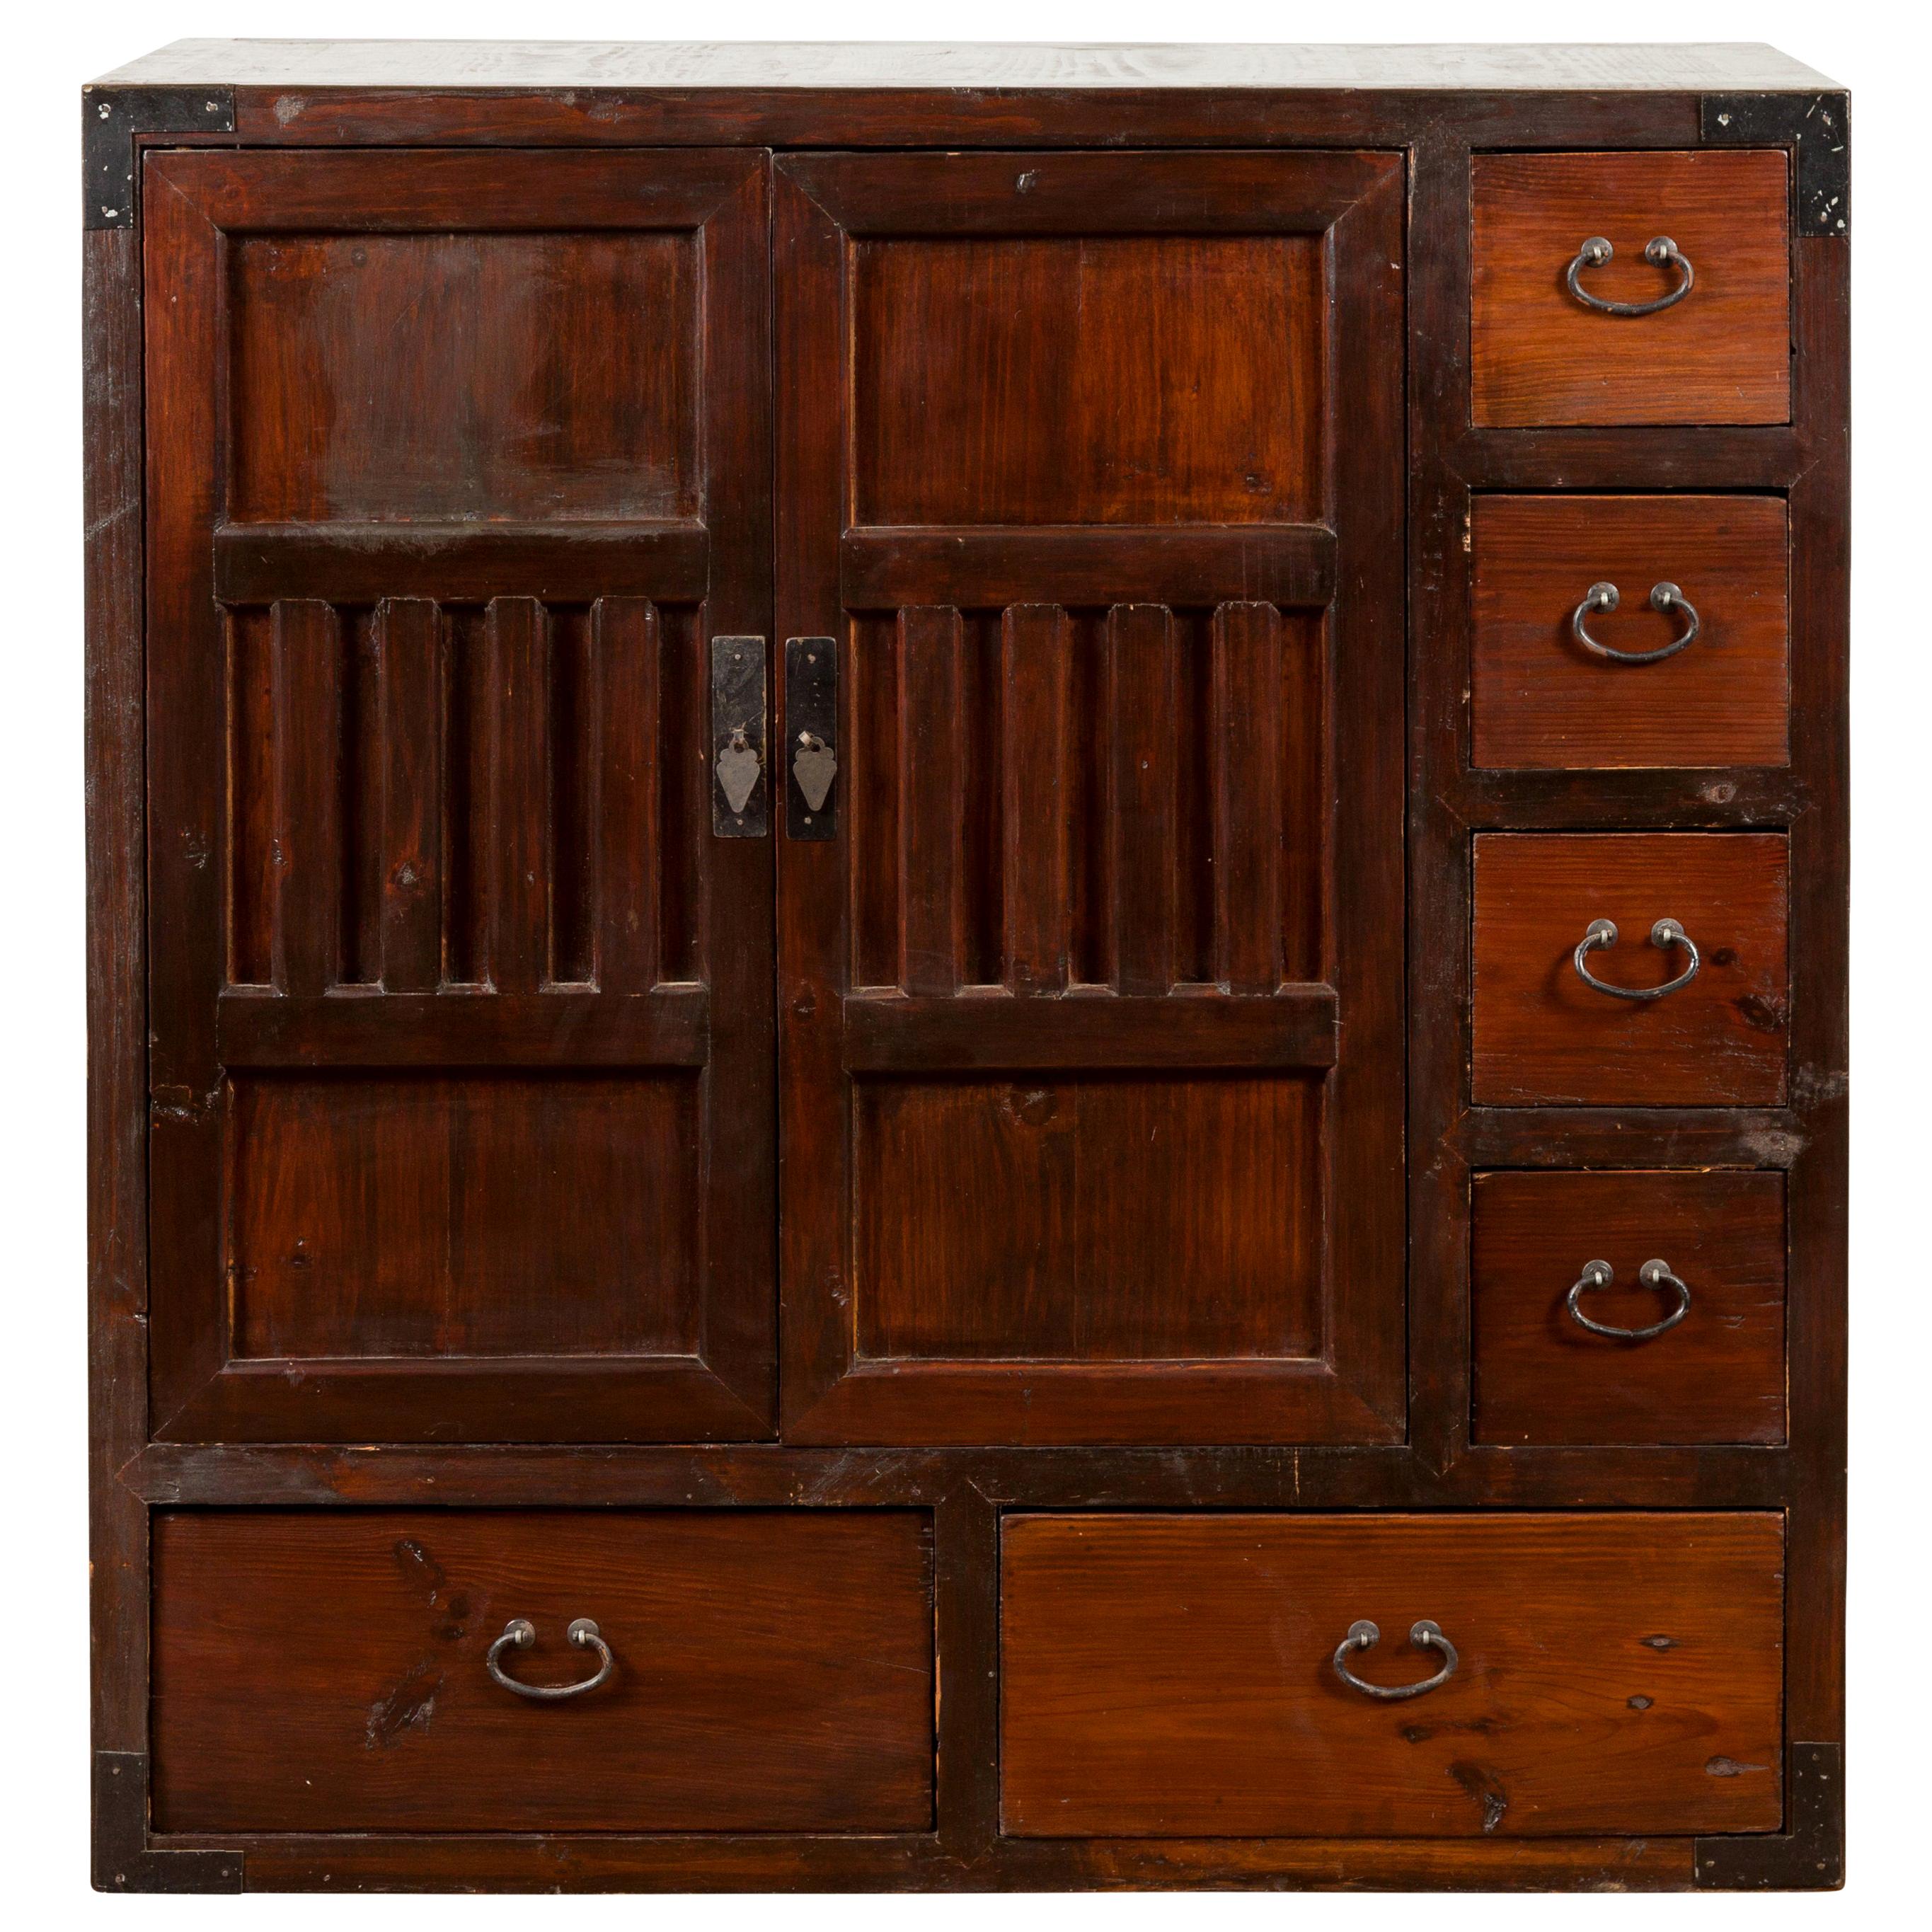 Japanese Early 20th Century Two-Way Floating Side Cabinet with Doors and Drawers